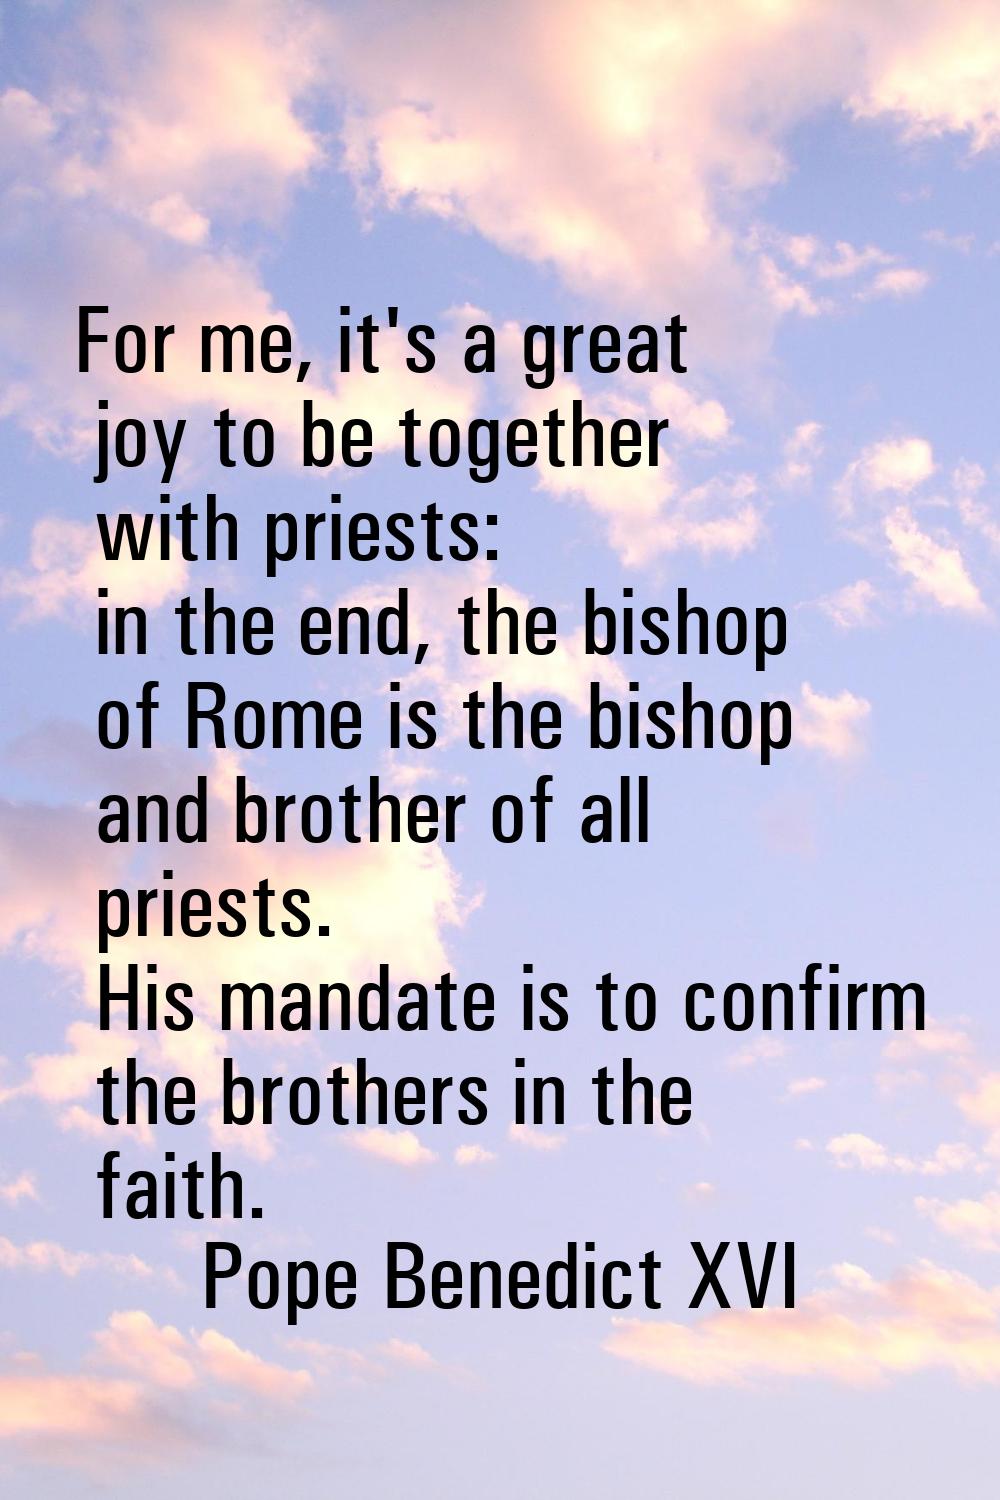 For me, it's a great joy to be together with priests: in the end, the bishop of Rome is the bishop 